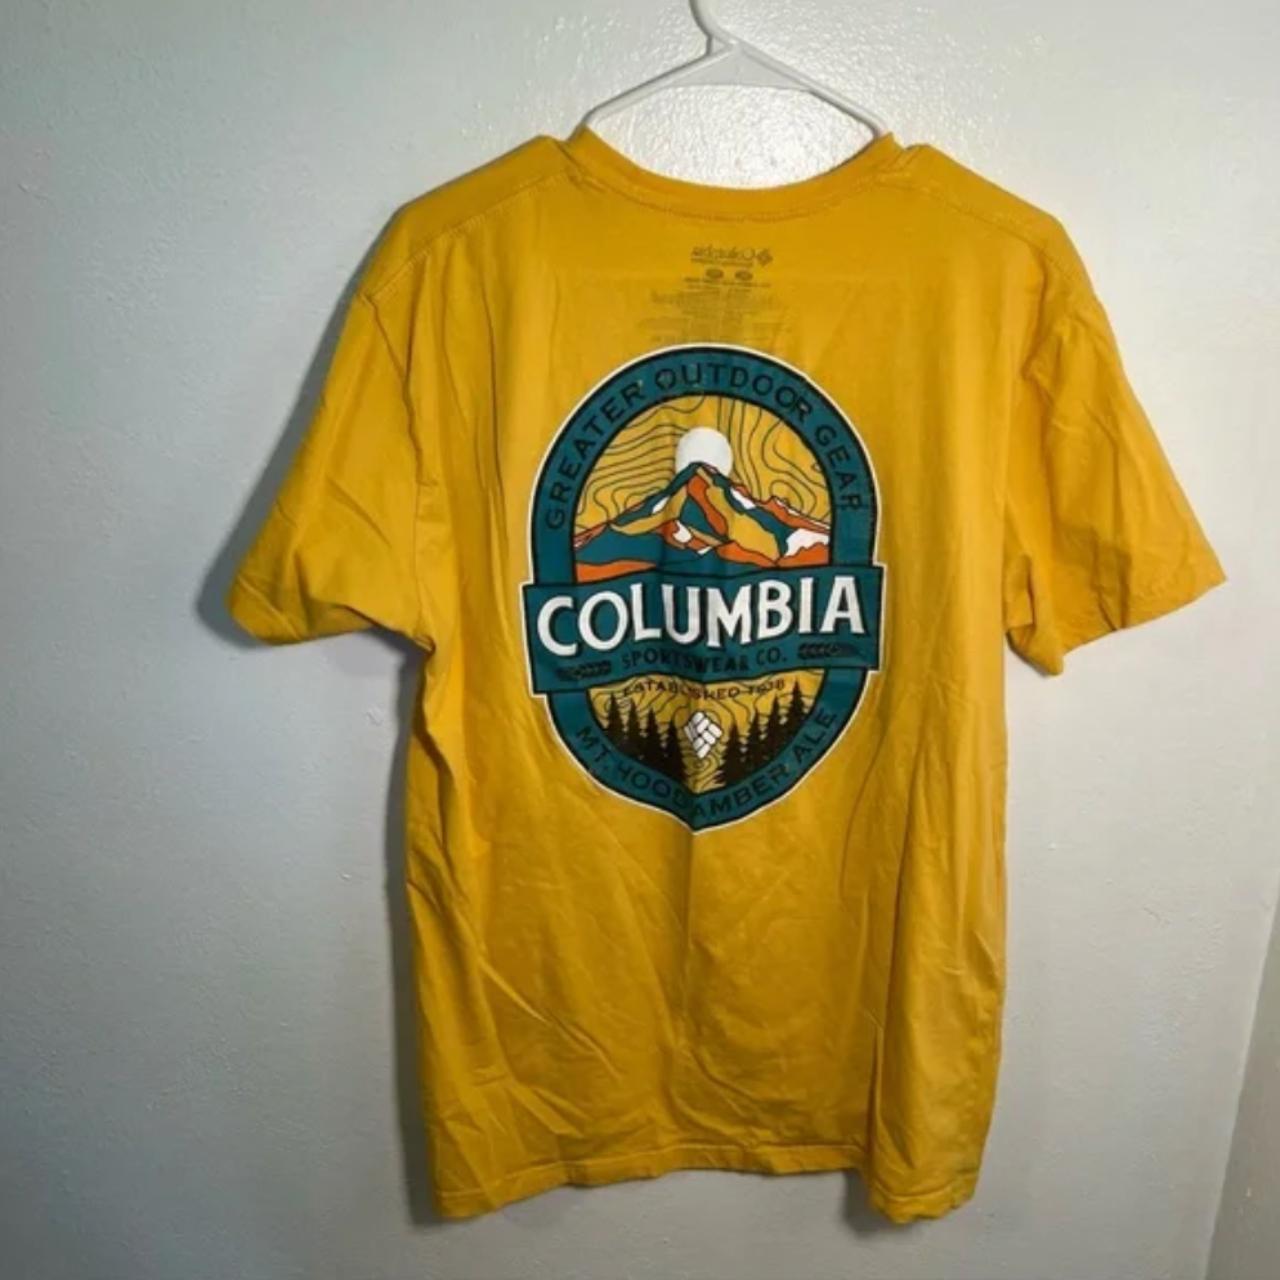 Columbia tee Worn but condition is great - Depop